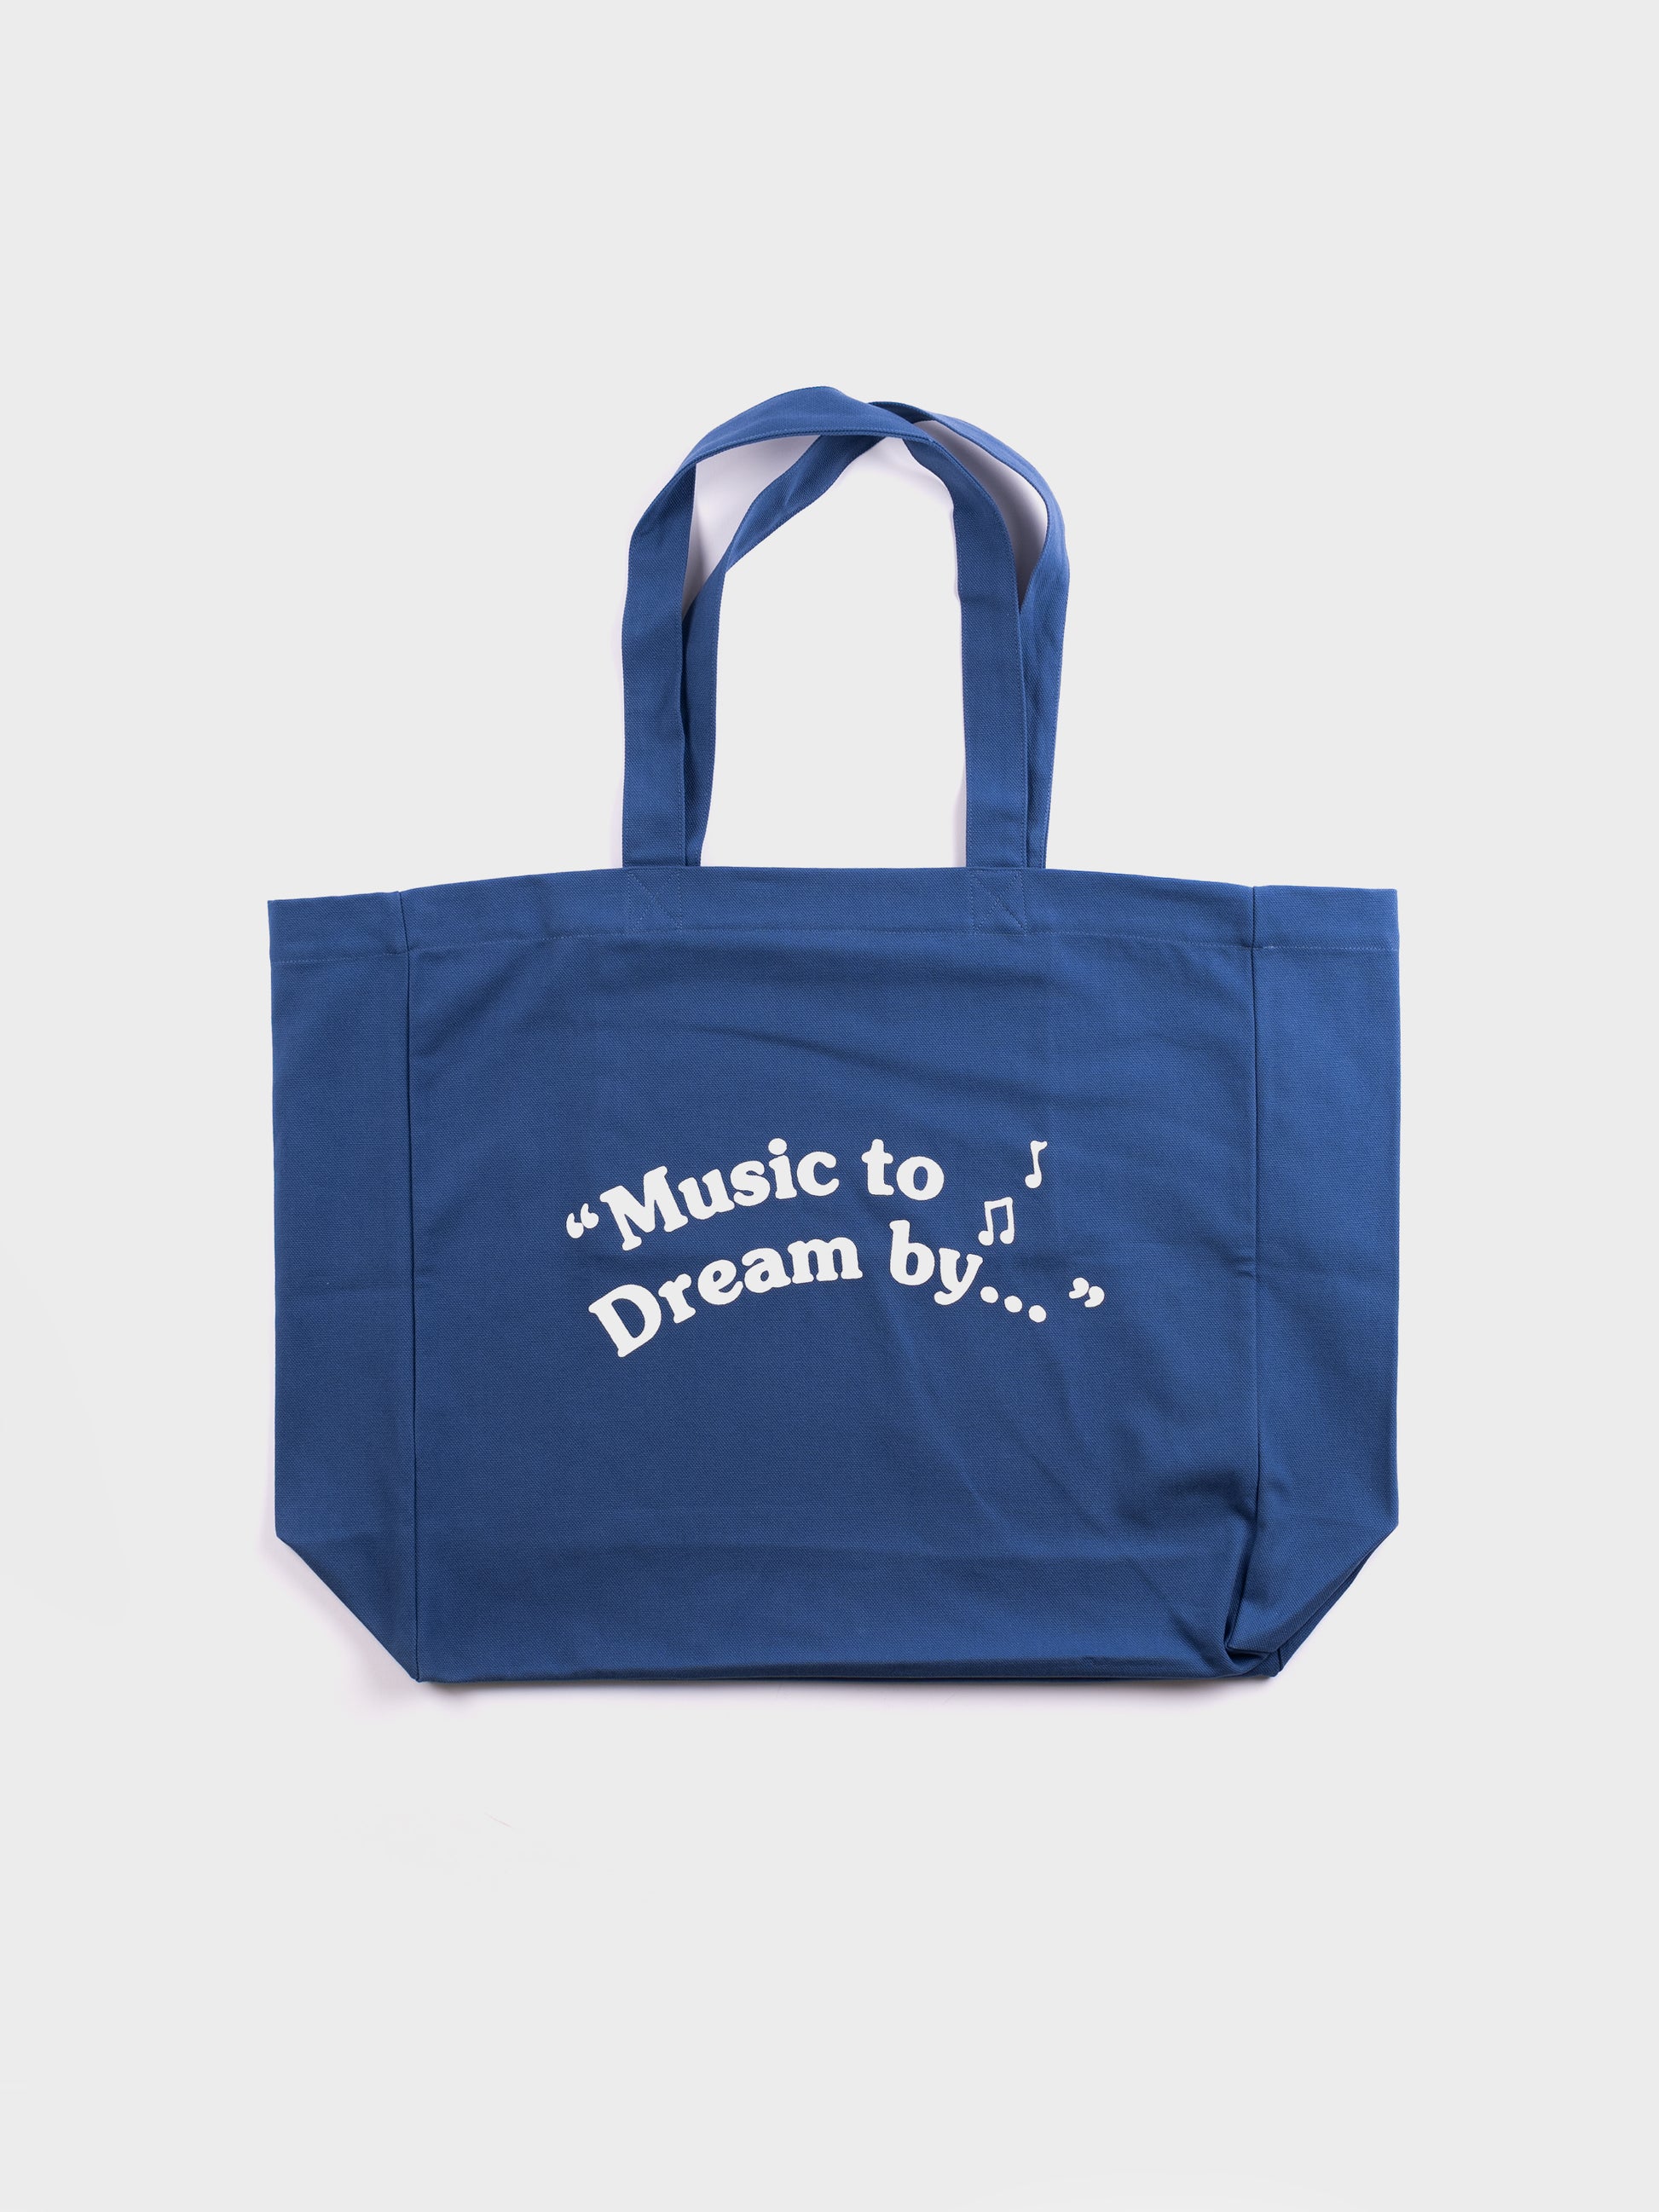 Good Morning Tapes Music to Dream By Tote Bag - Sea